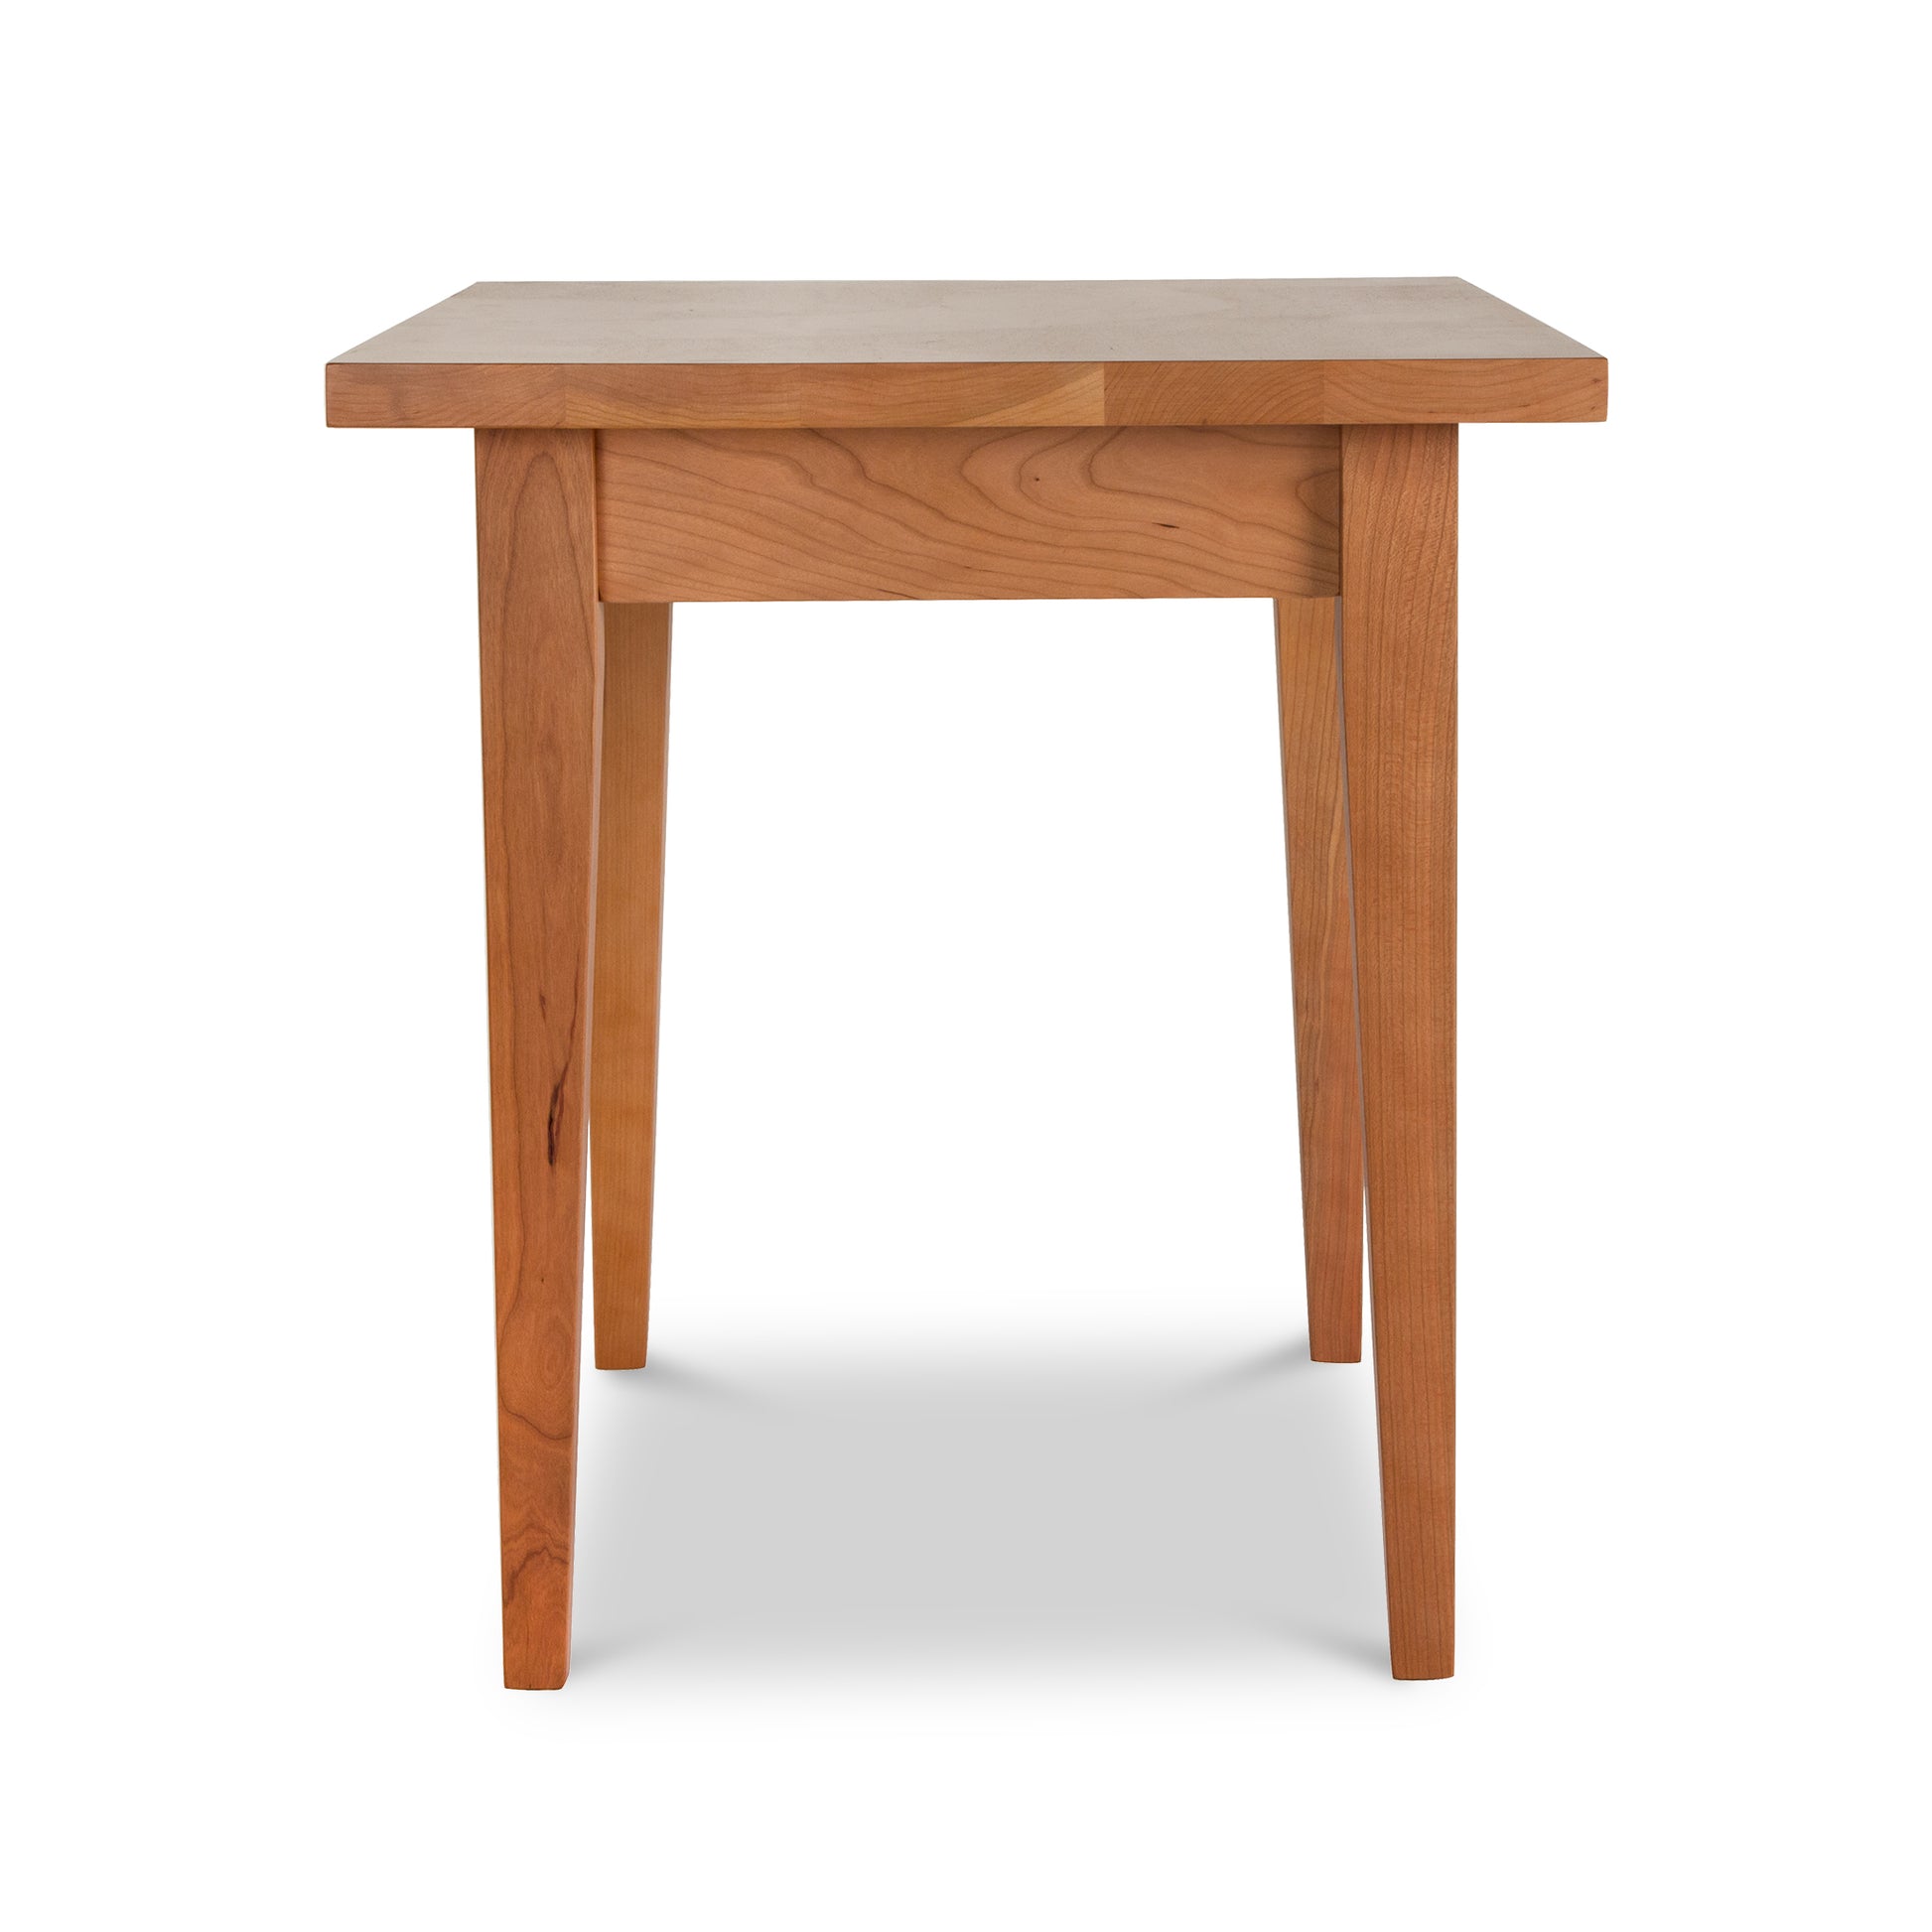 A Classic Shaker End Table from Lyndon Furniture, with a square top, is perfect for adding a touch of luxury and functionality to any space.